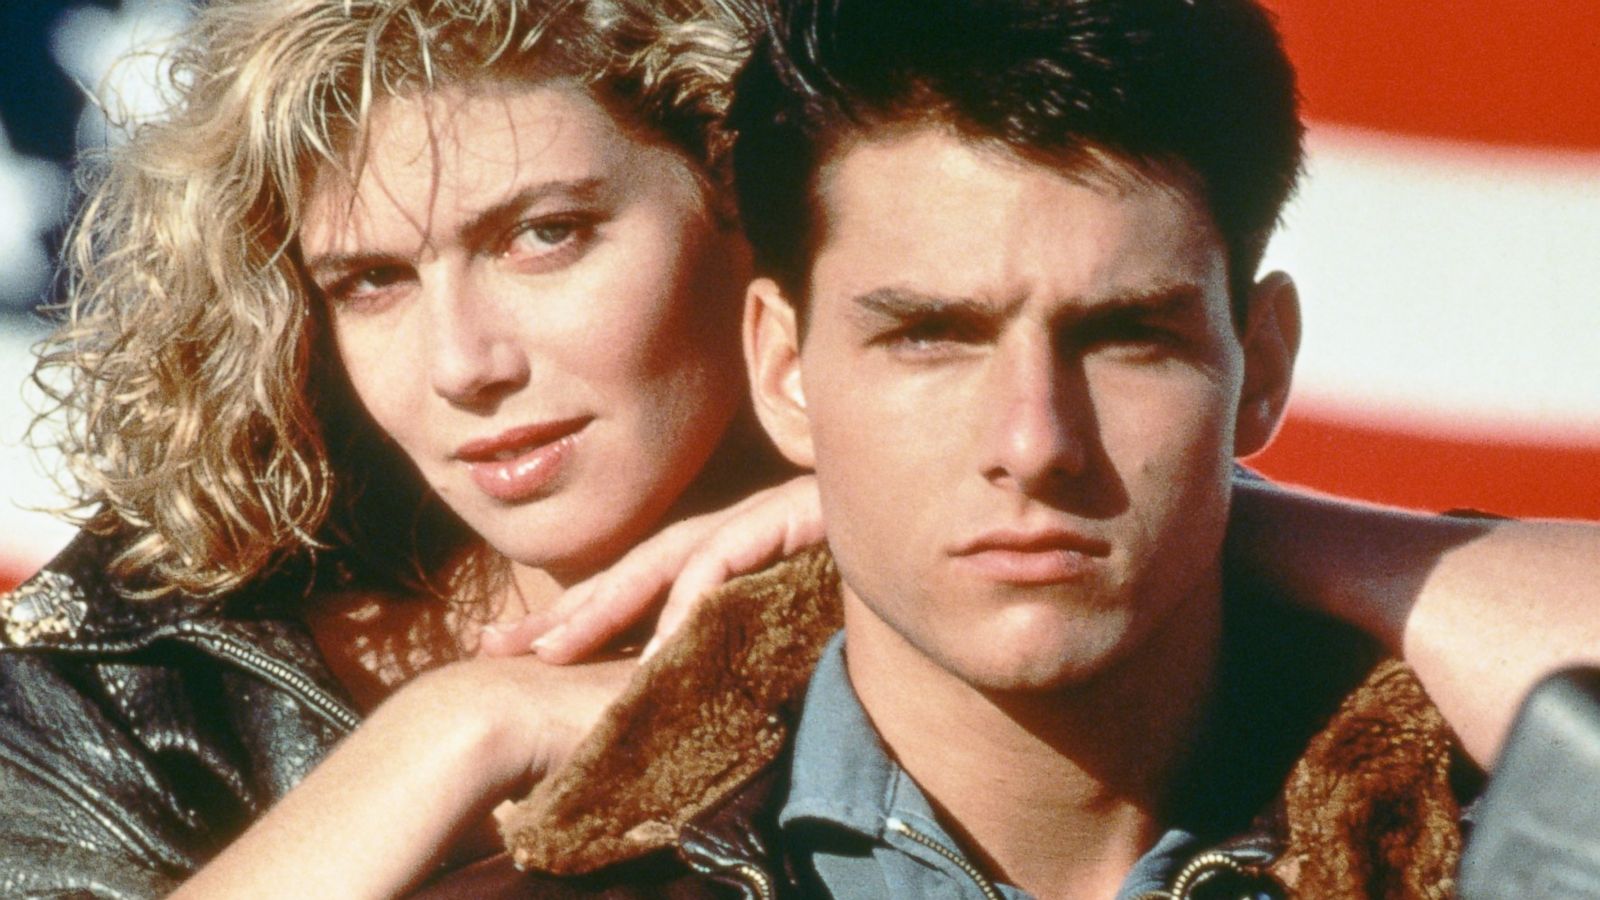 Is Top Gun based on a true story?